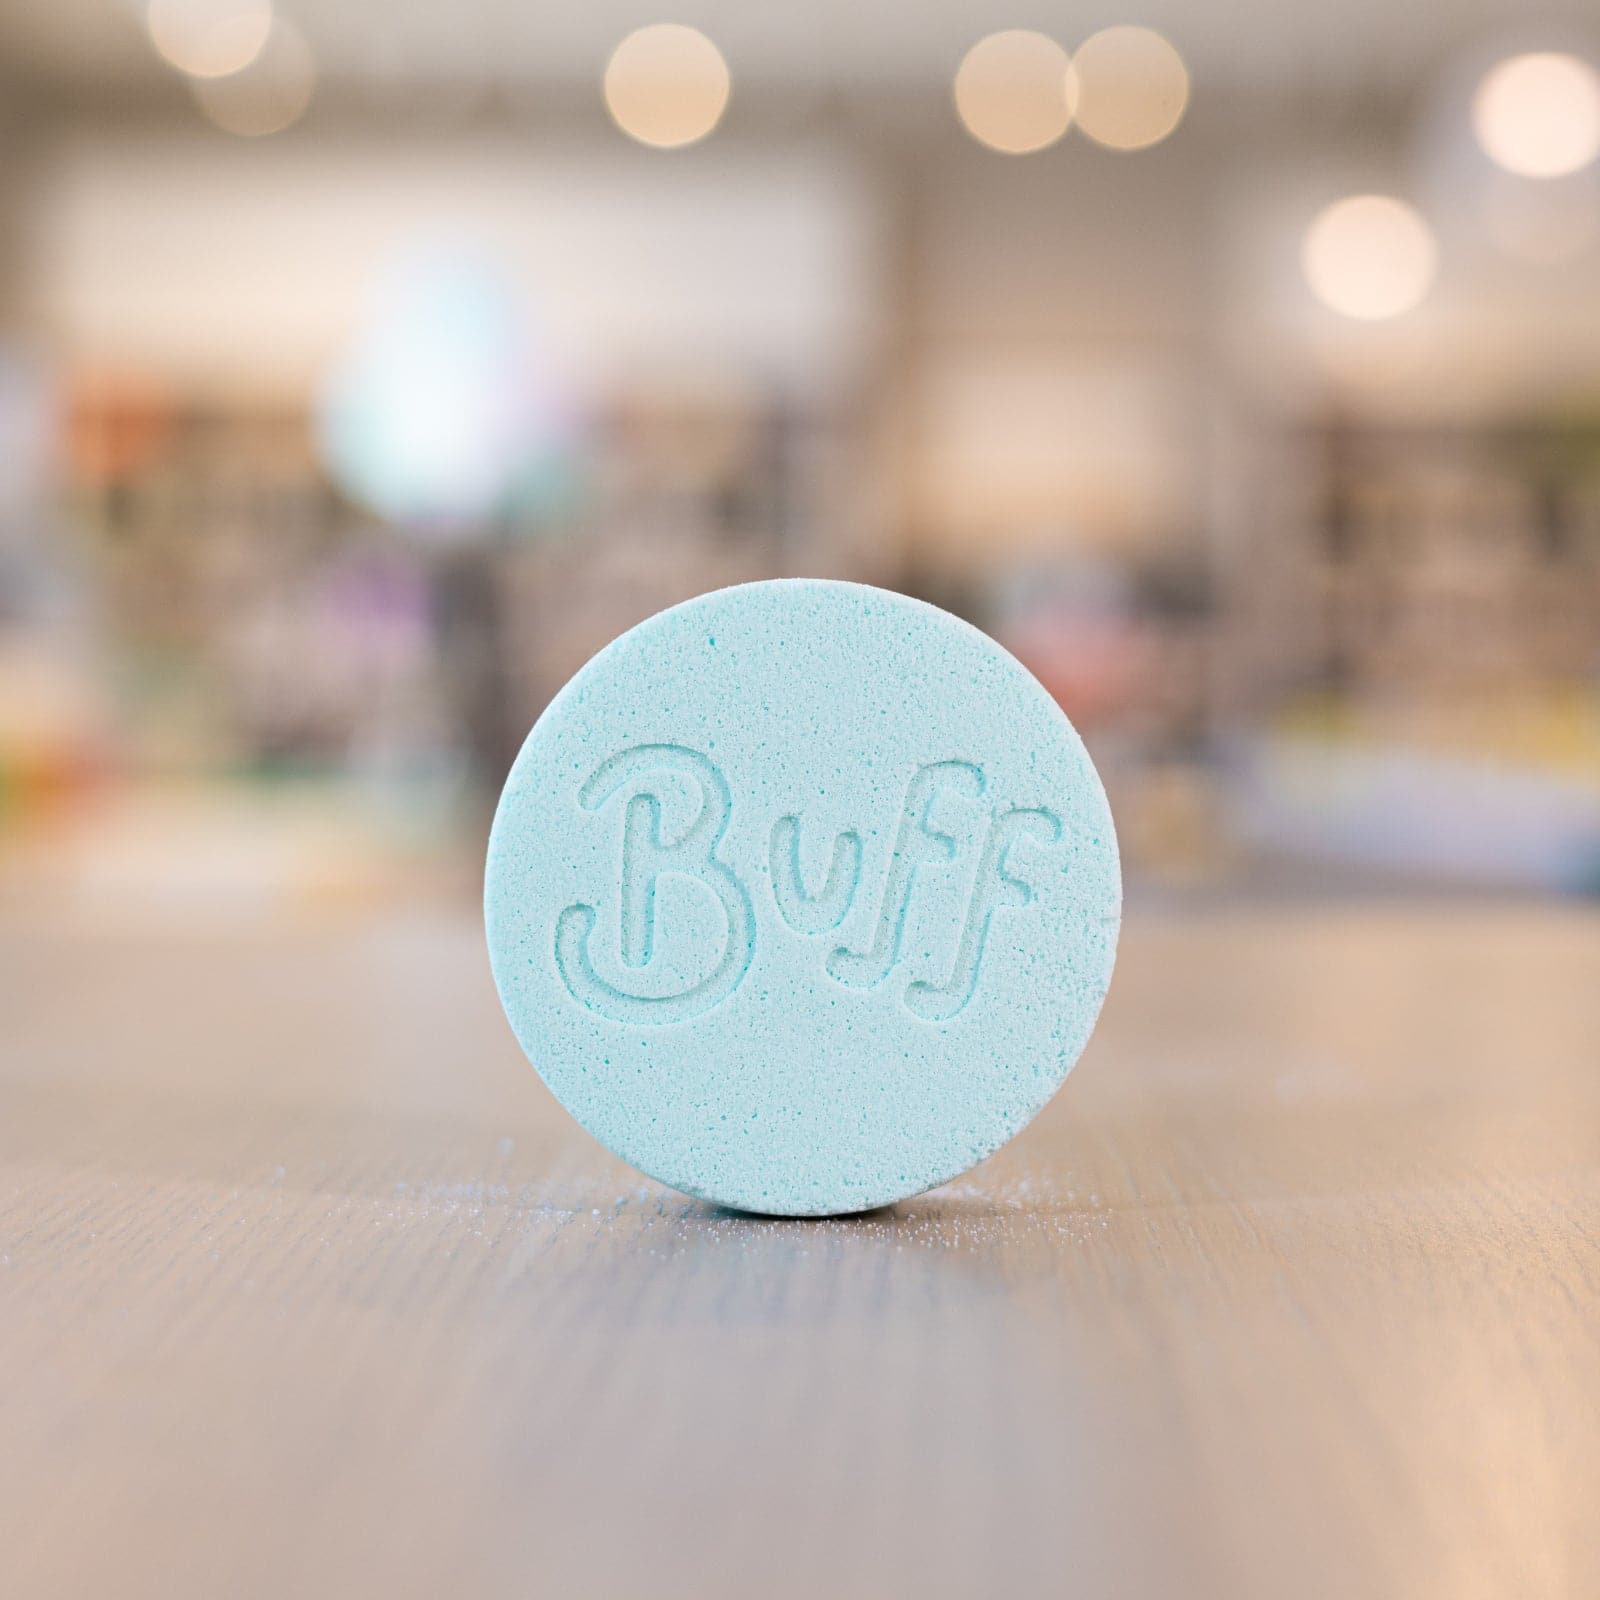 light blue Narcissist Shower Fizzy with "Buff" engraved in it